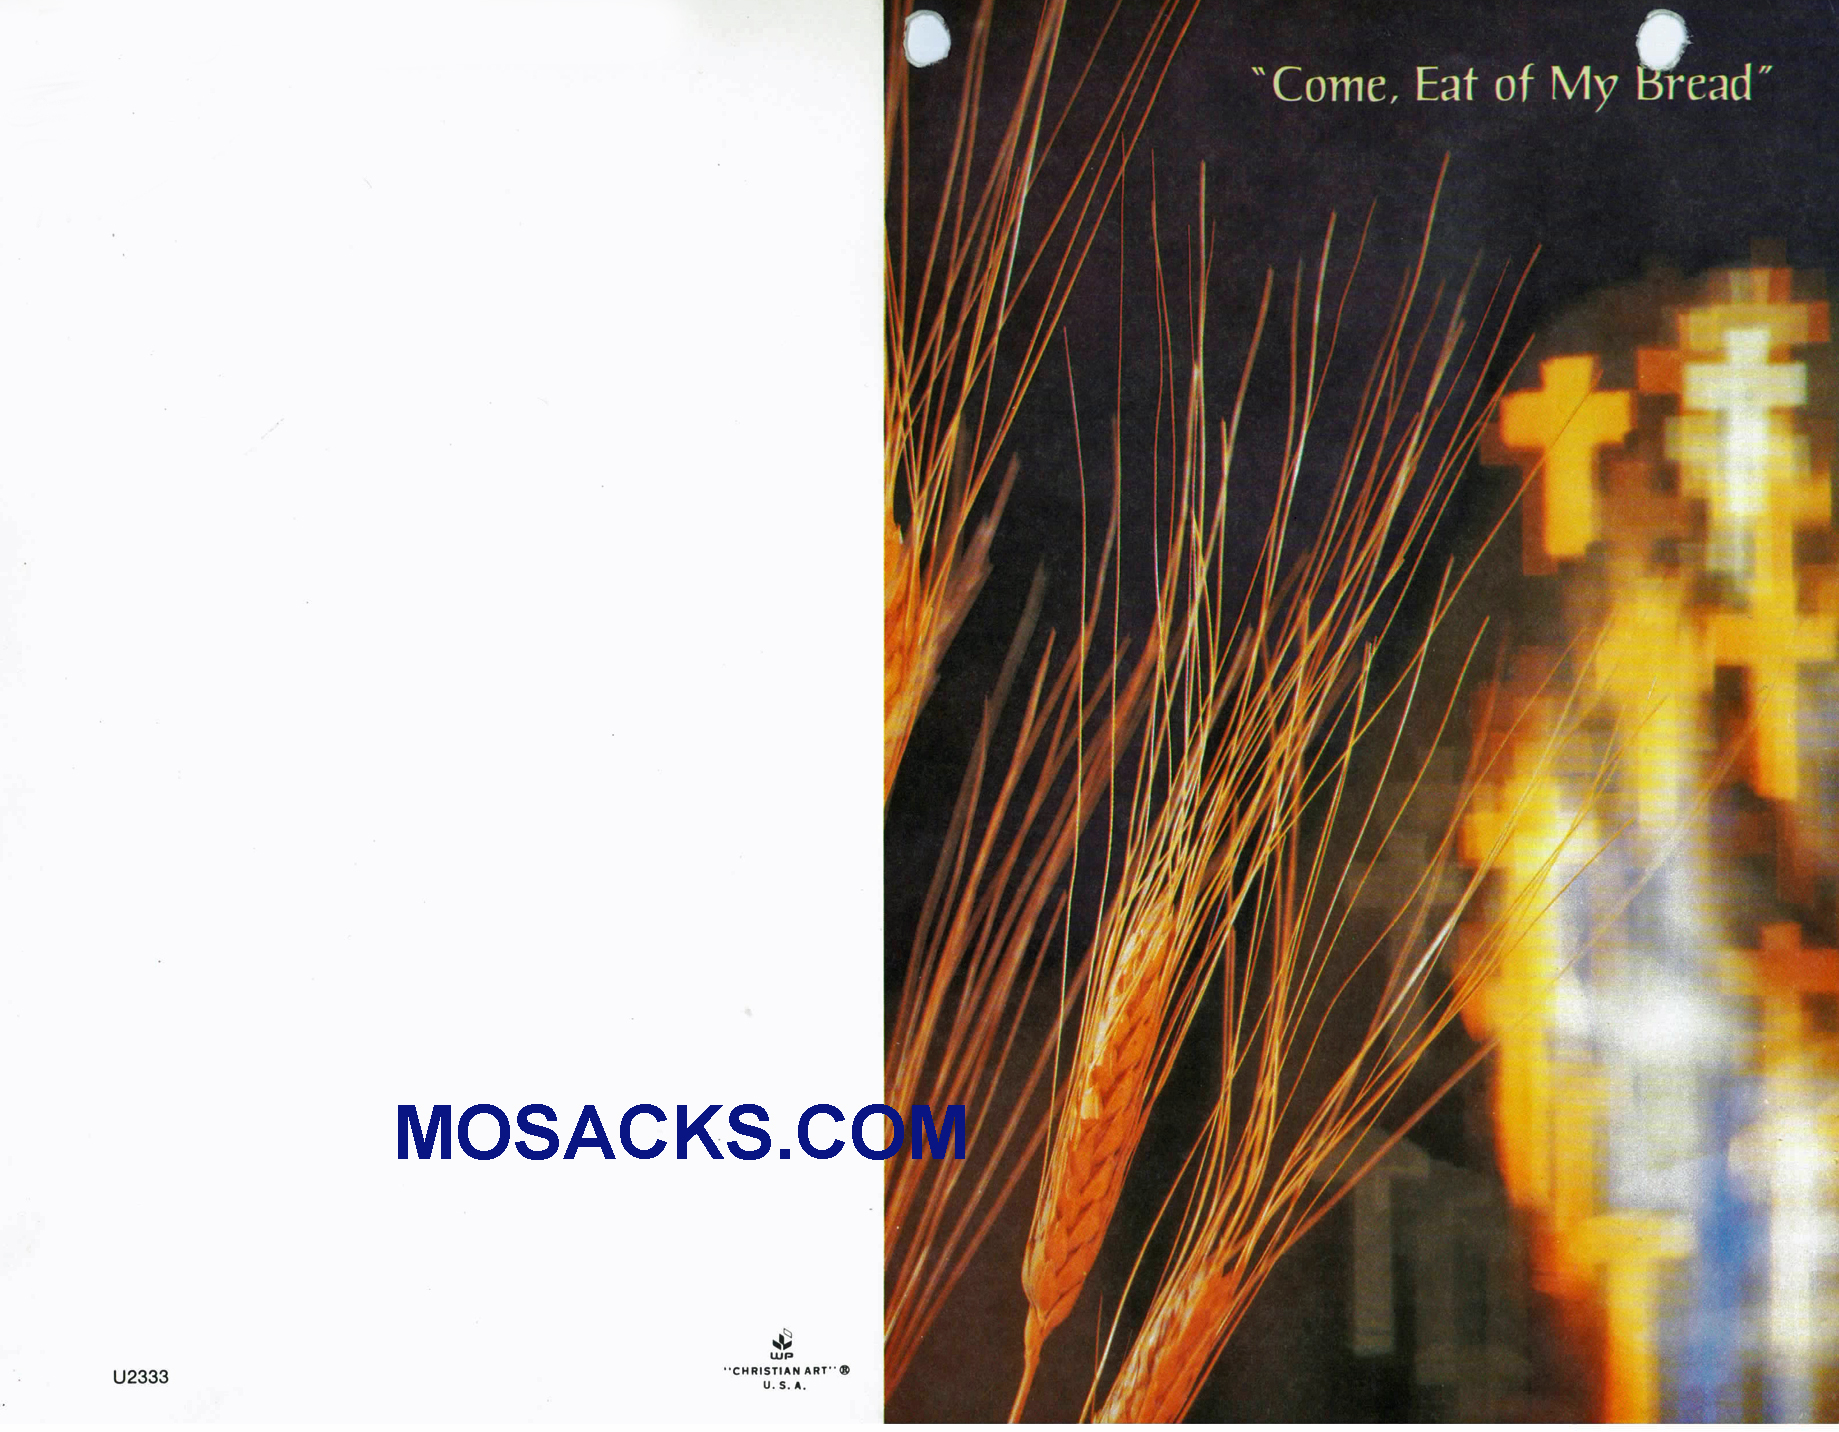 Bulletin Covers Come Eat Of My Bread 100 Pack-U2333, Communion Cover